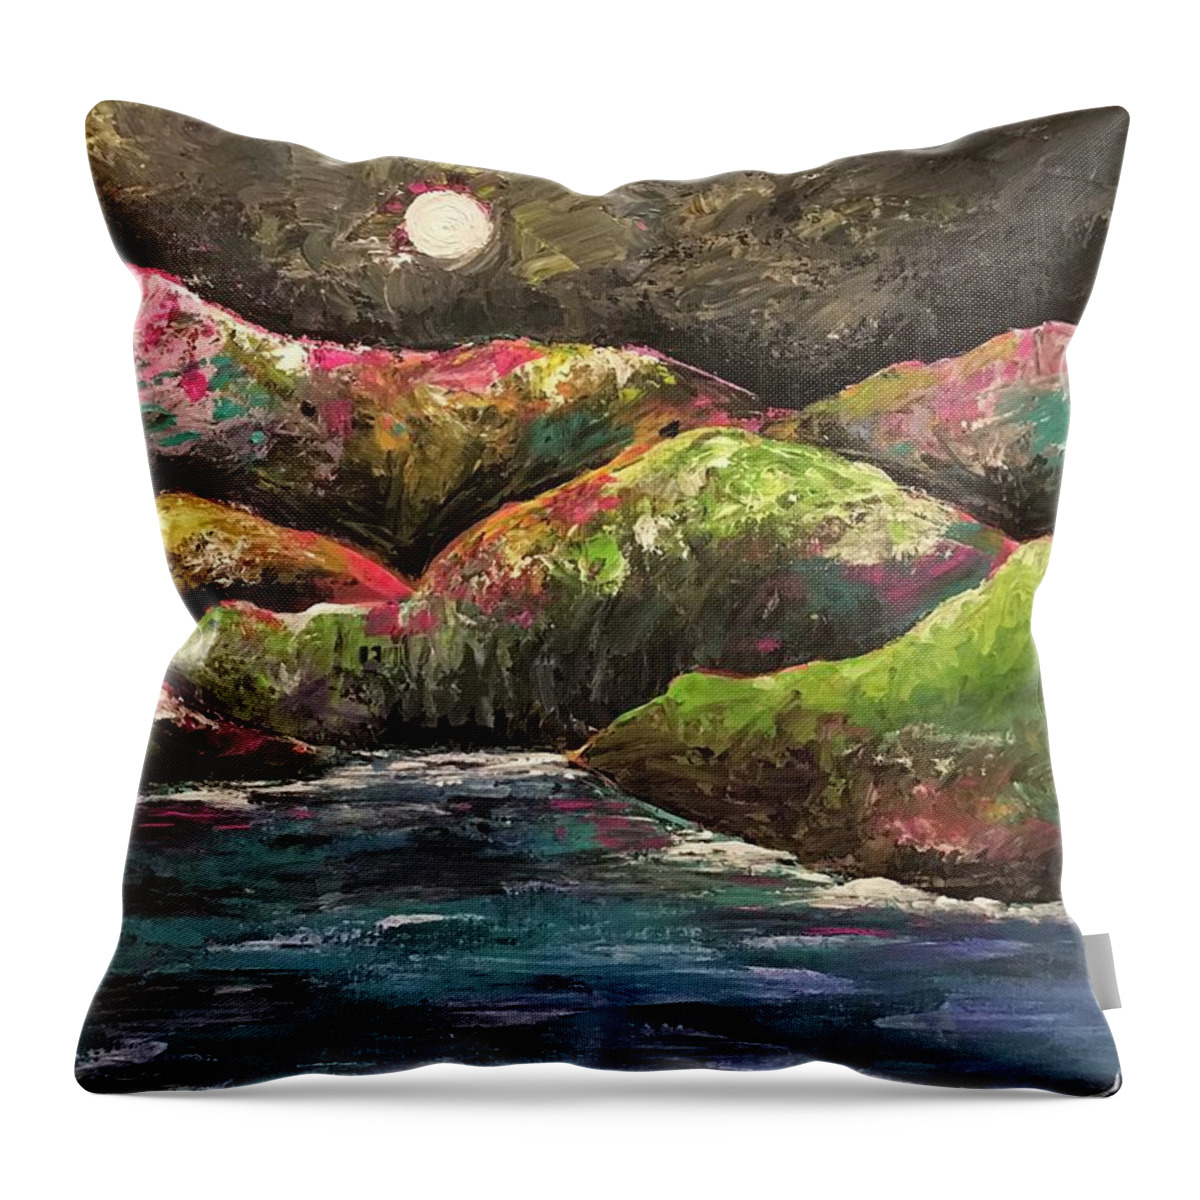 Moonlight Throw Pillow featuring the painting Amazing moonlight by Maria Karlosak